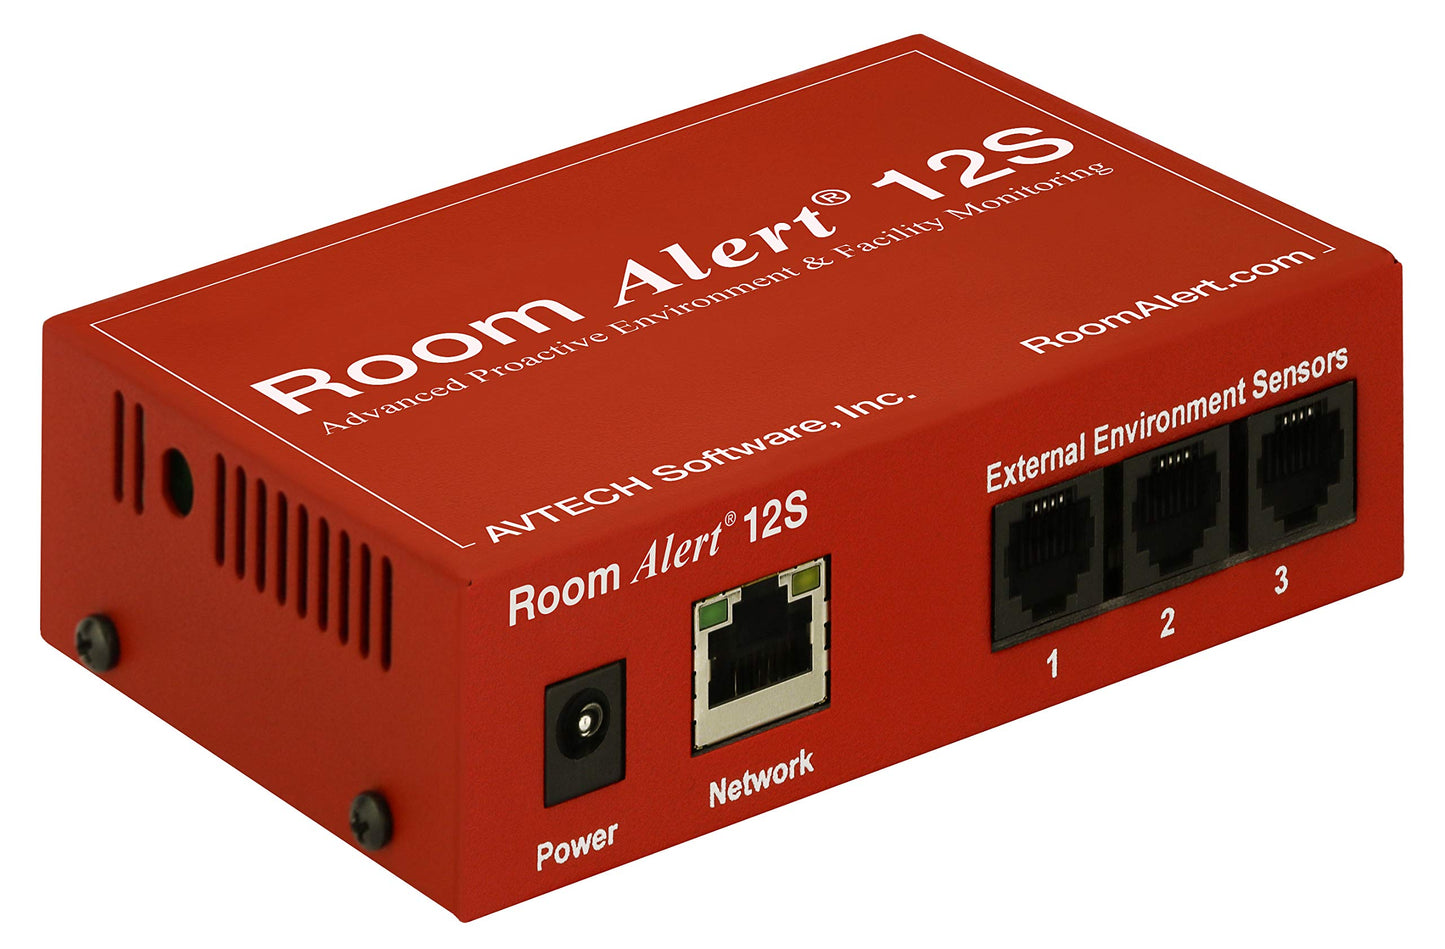 Room Alert 12S Advanced Proactive Environment Monitor – Built-in Temperature Sensor, Supports SSL/TLS, 2048-bit Encryption, SNMP v3, 12 Sensors, 24/7 Alerting & Reporting, Made in USA